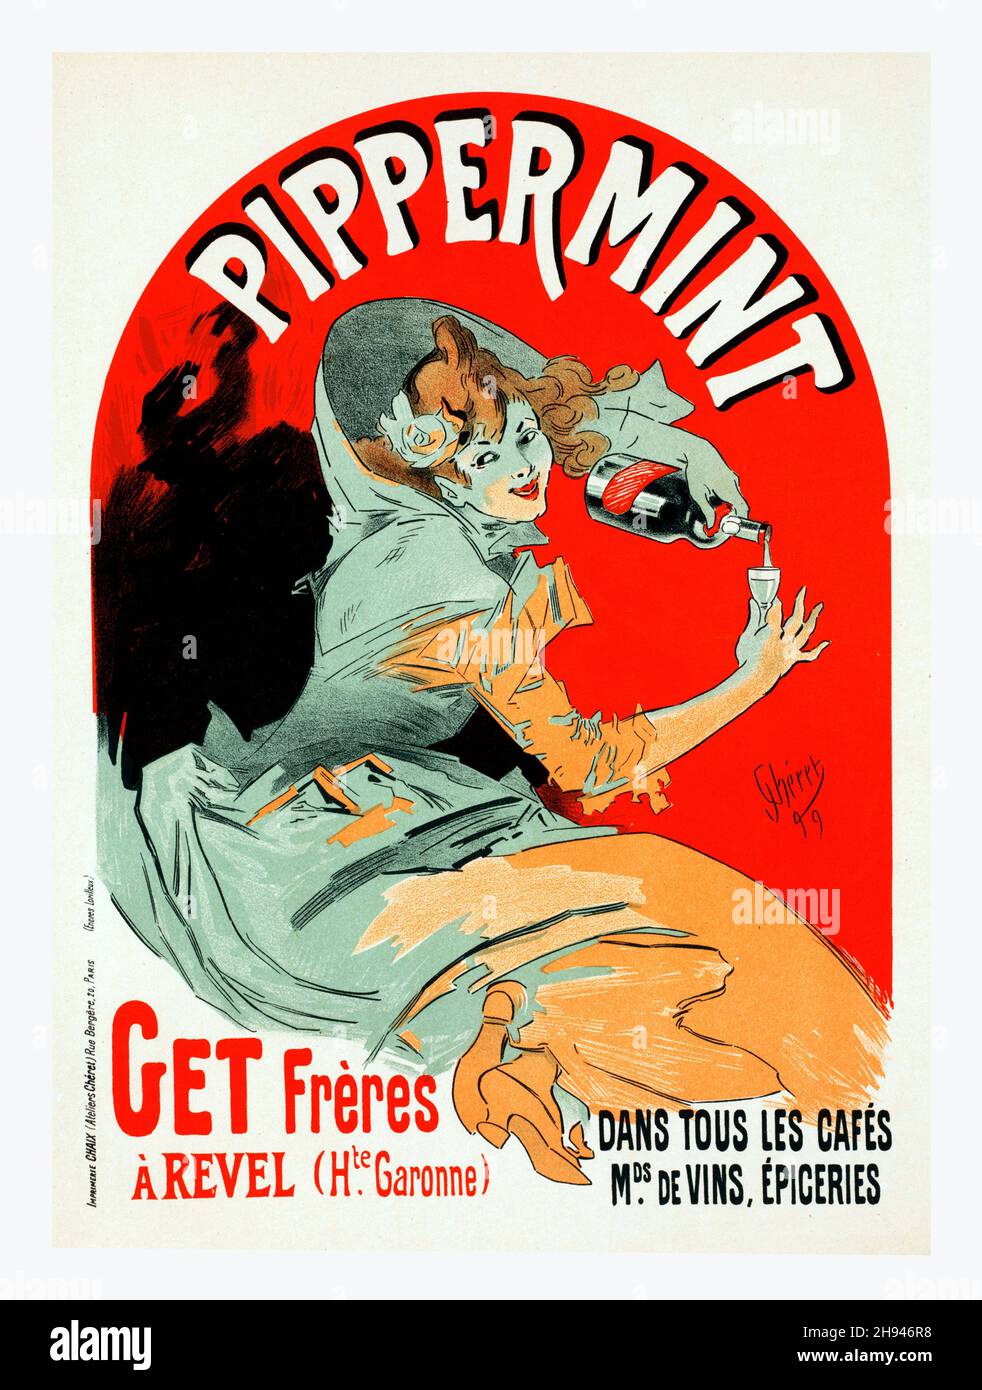 Pippermint, Get Frères, 1900. Poster art by Jules Chéret (1836-1932). French. Stock Photo